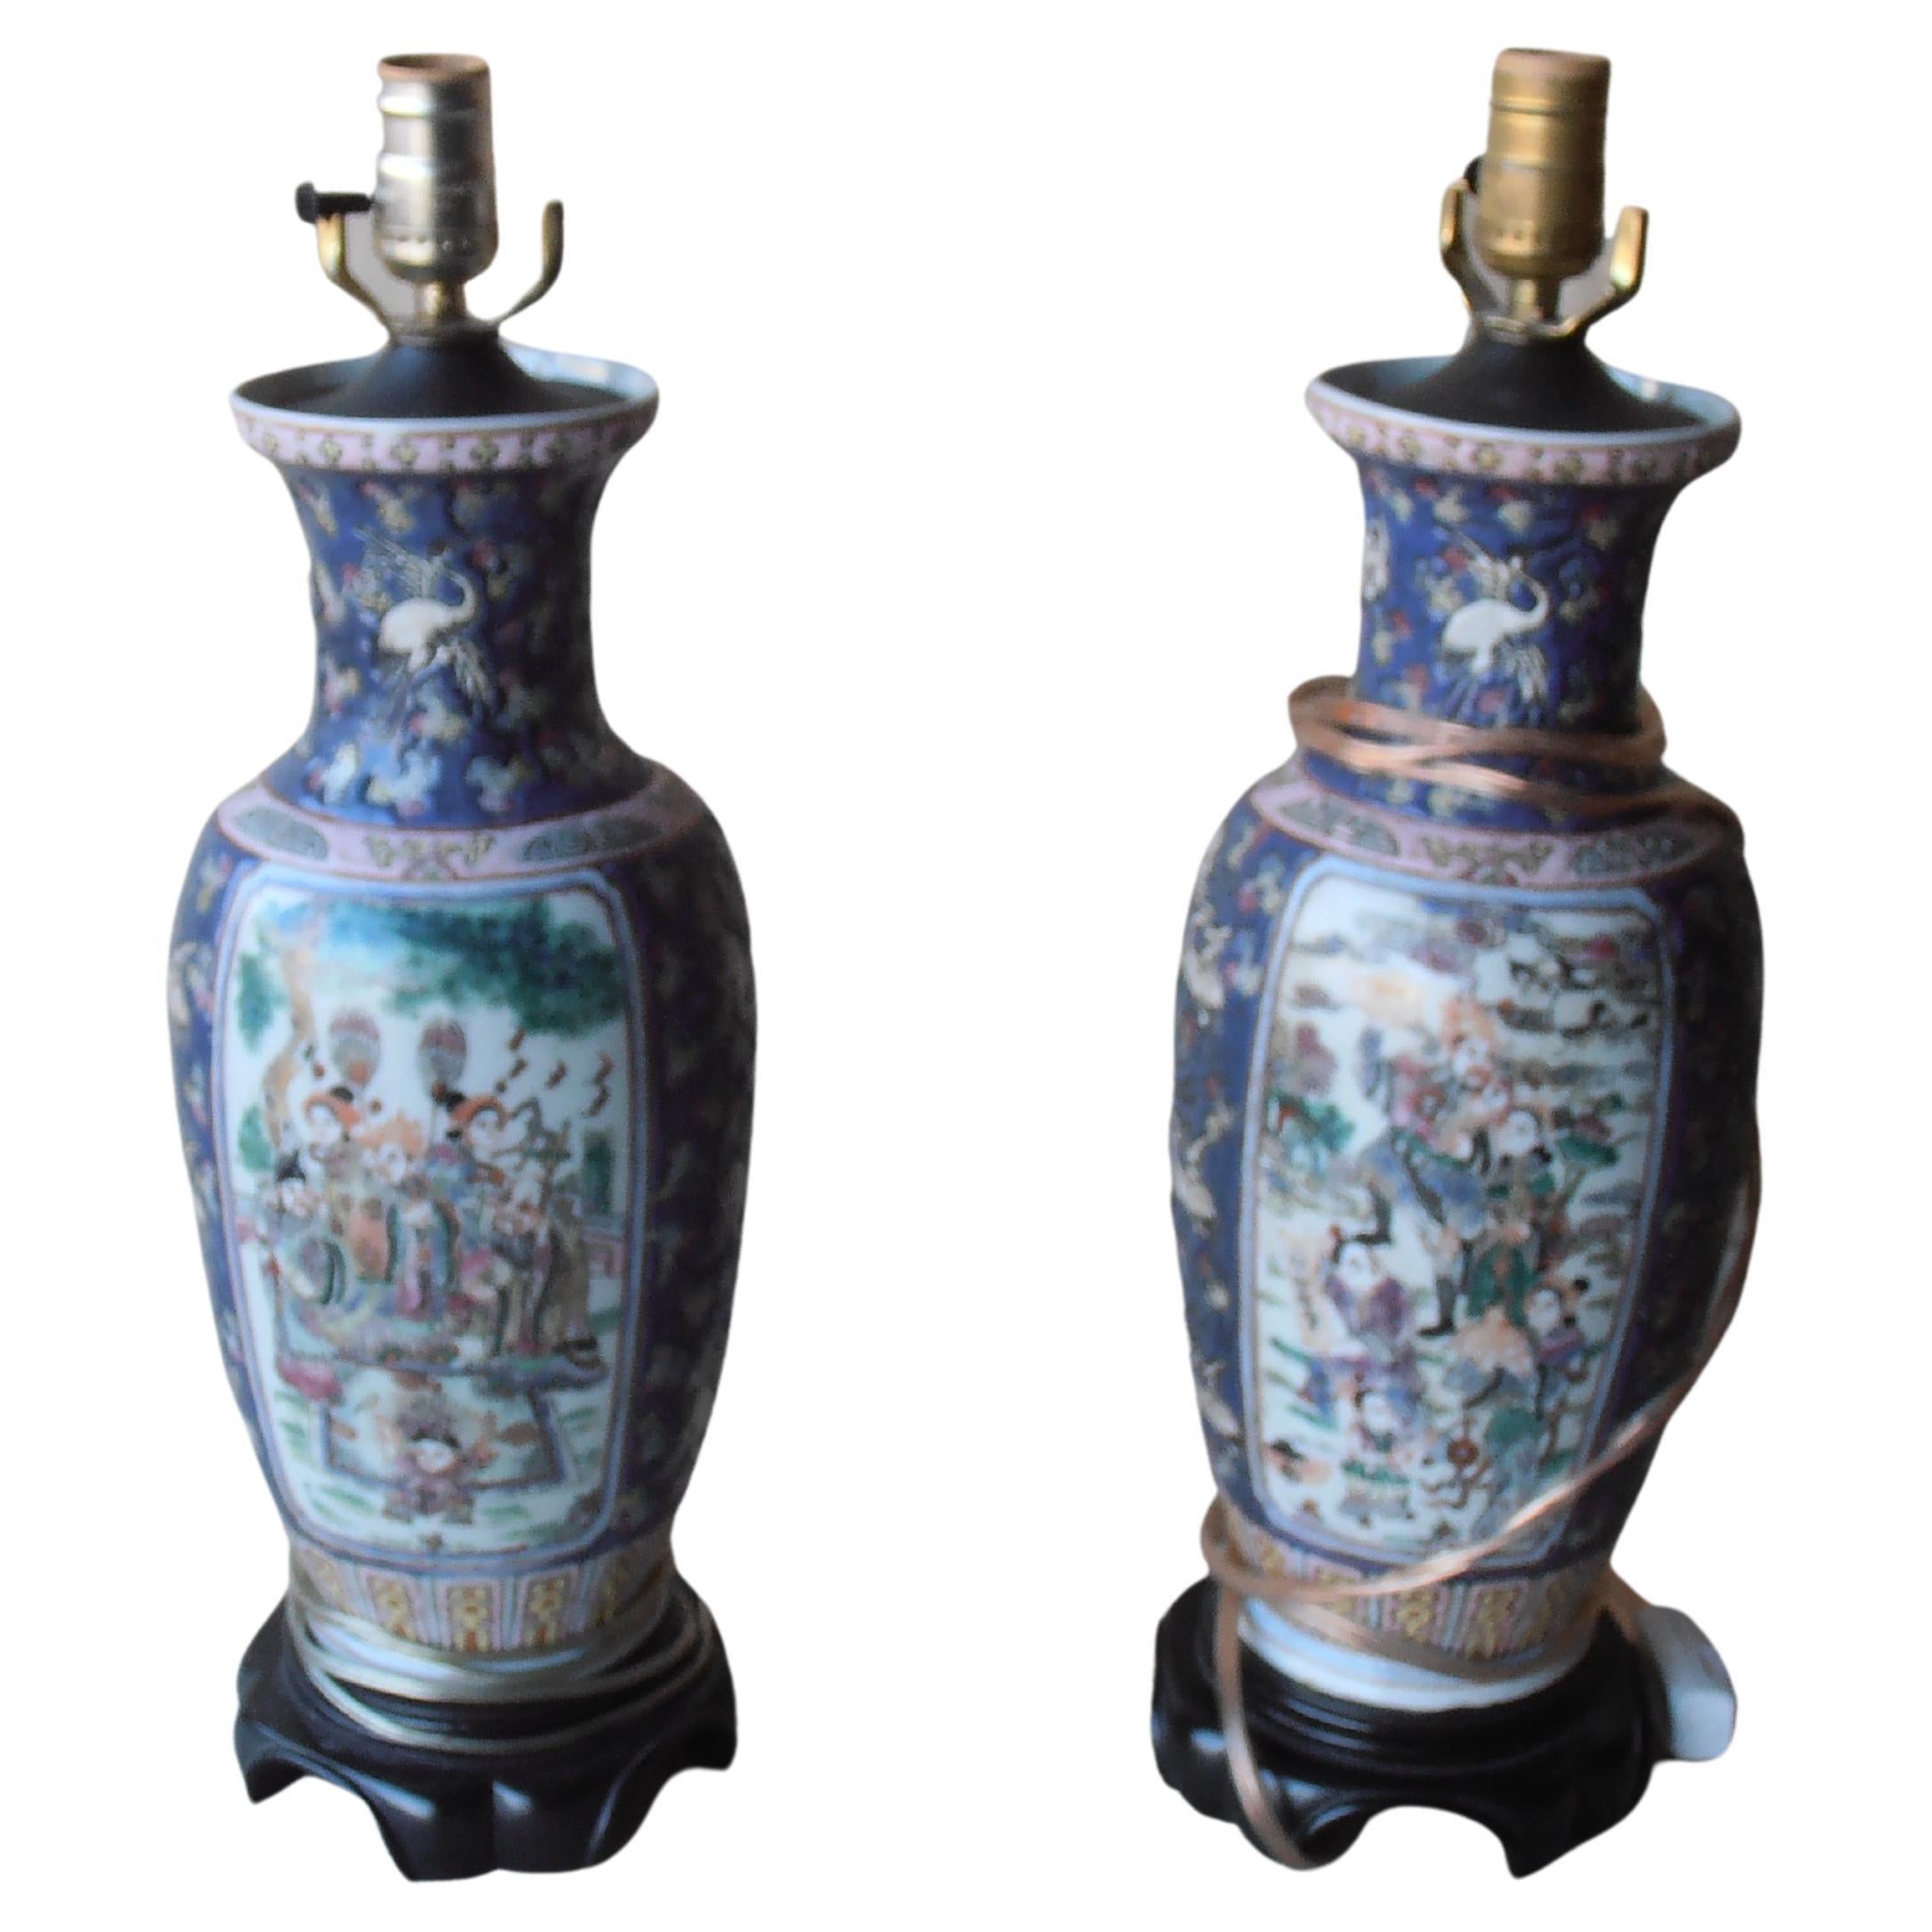 Pair of Chinese Porcelain Vases Converted to Lamps